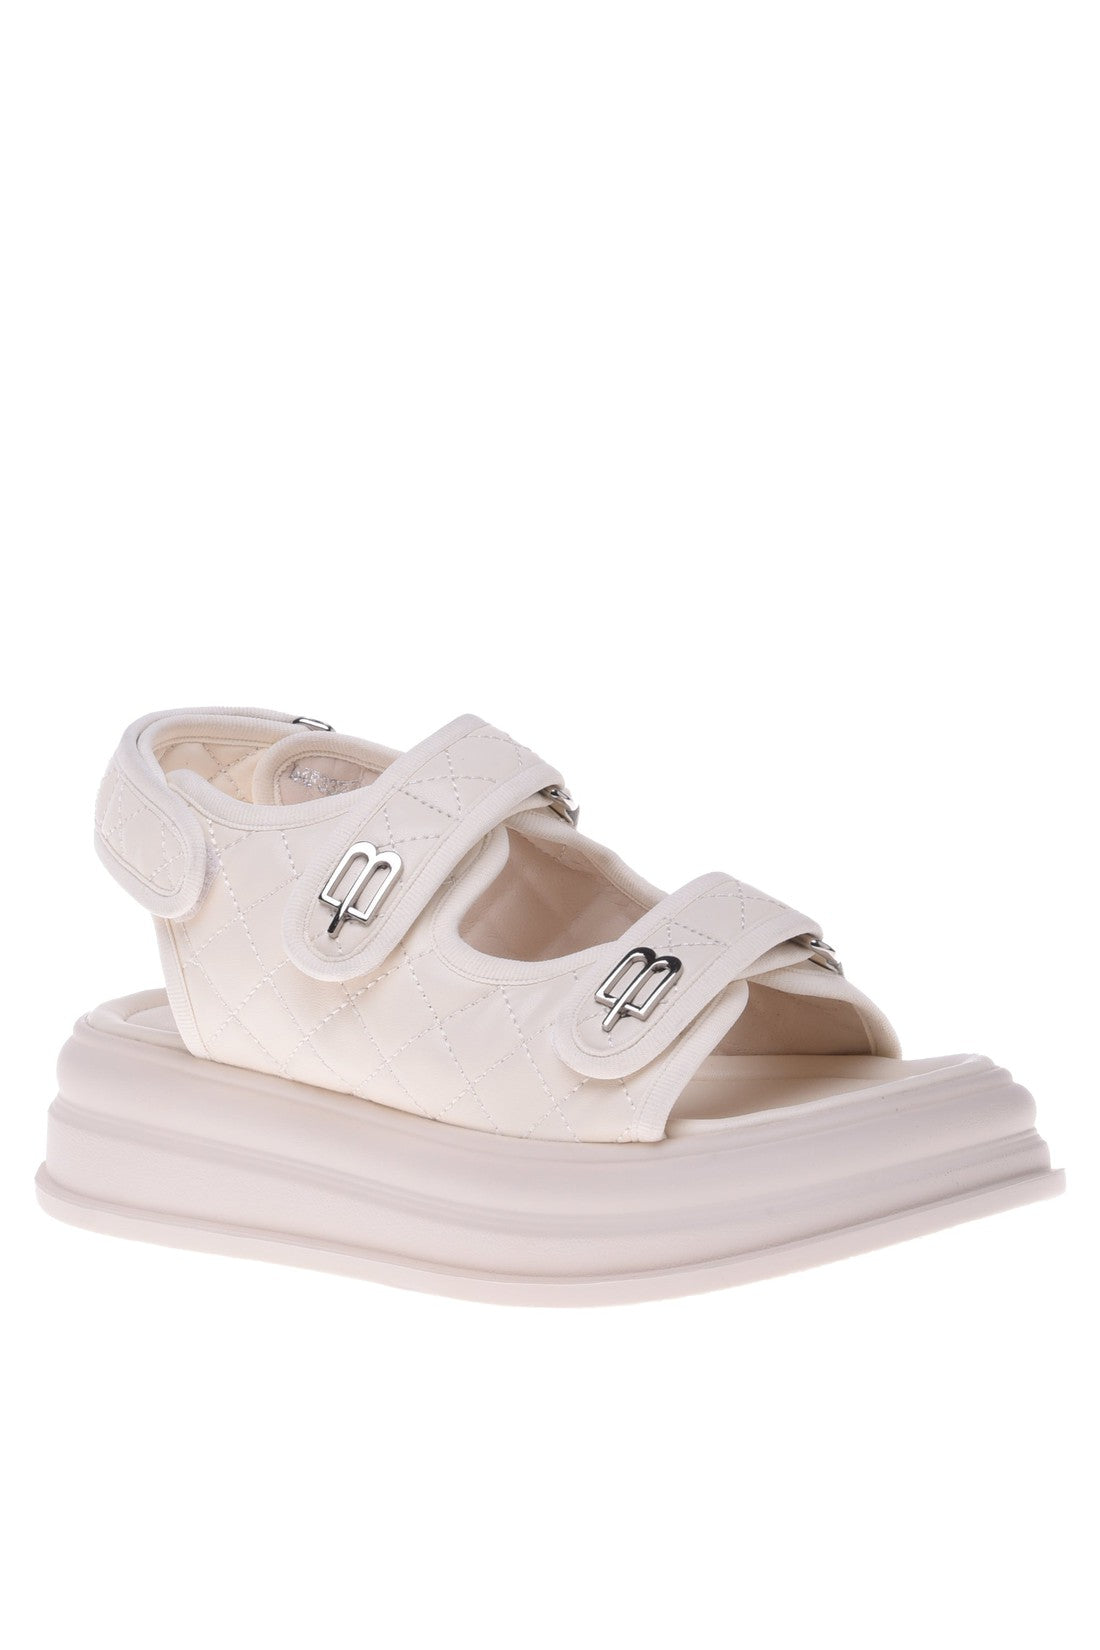 Sandal in cream quilted leather